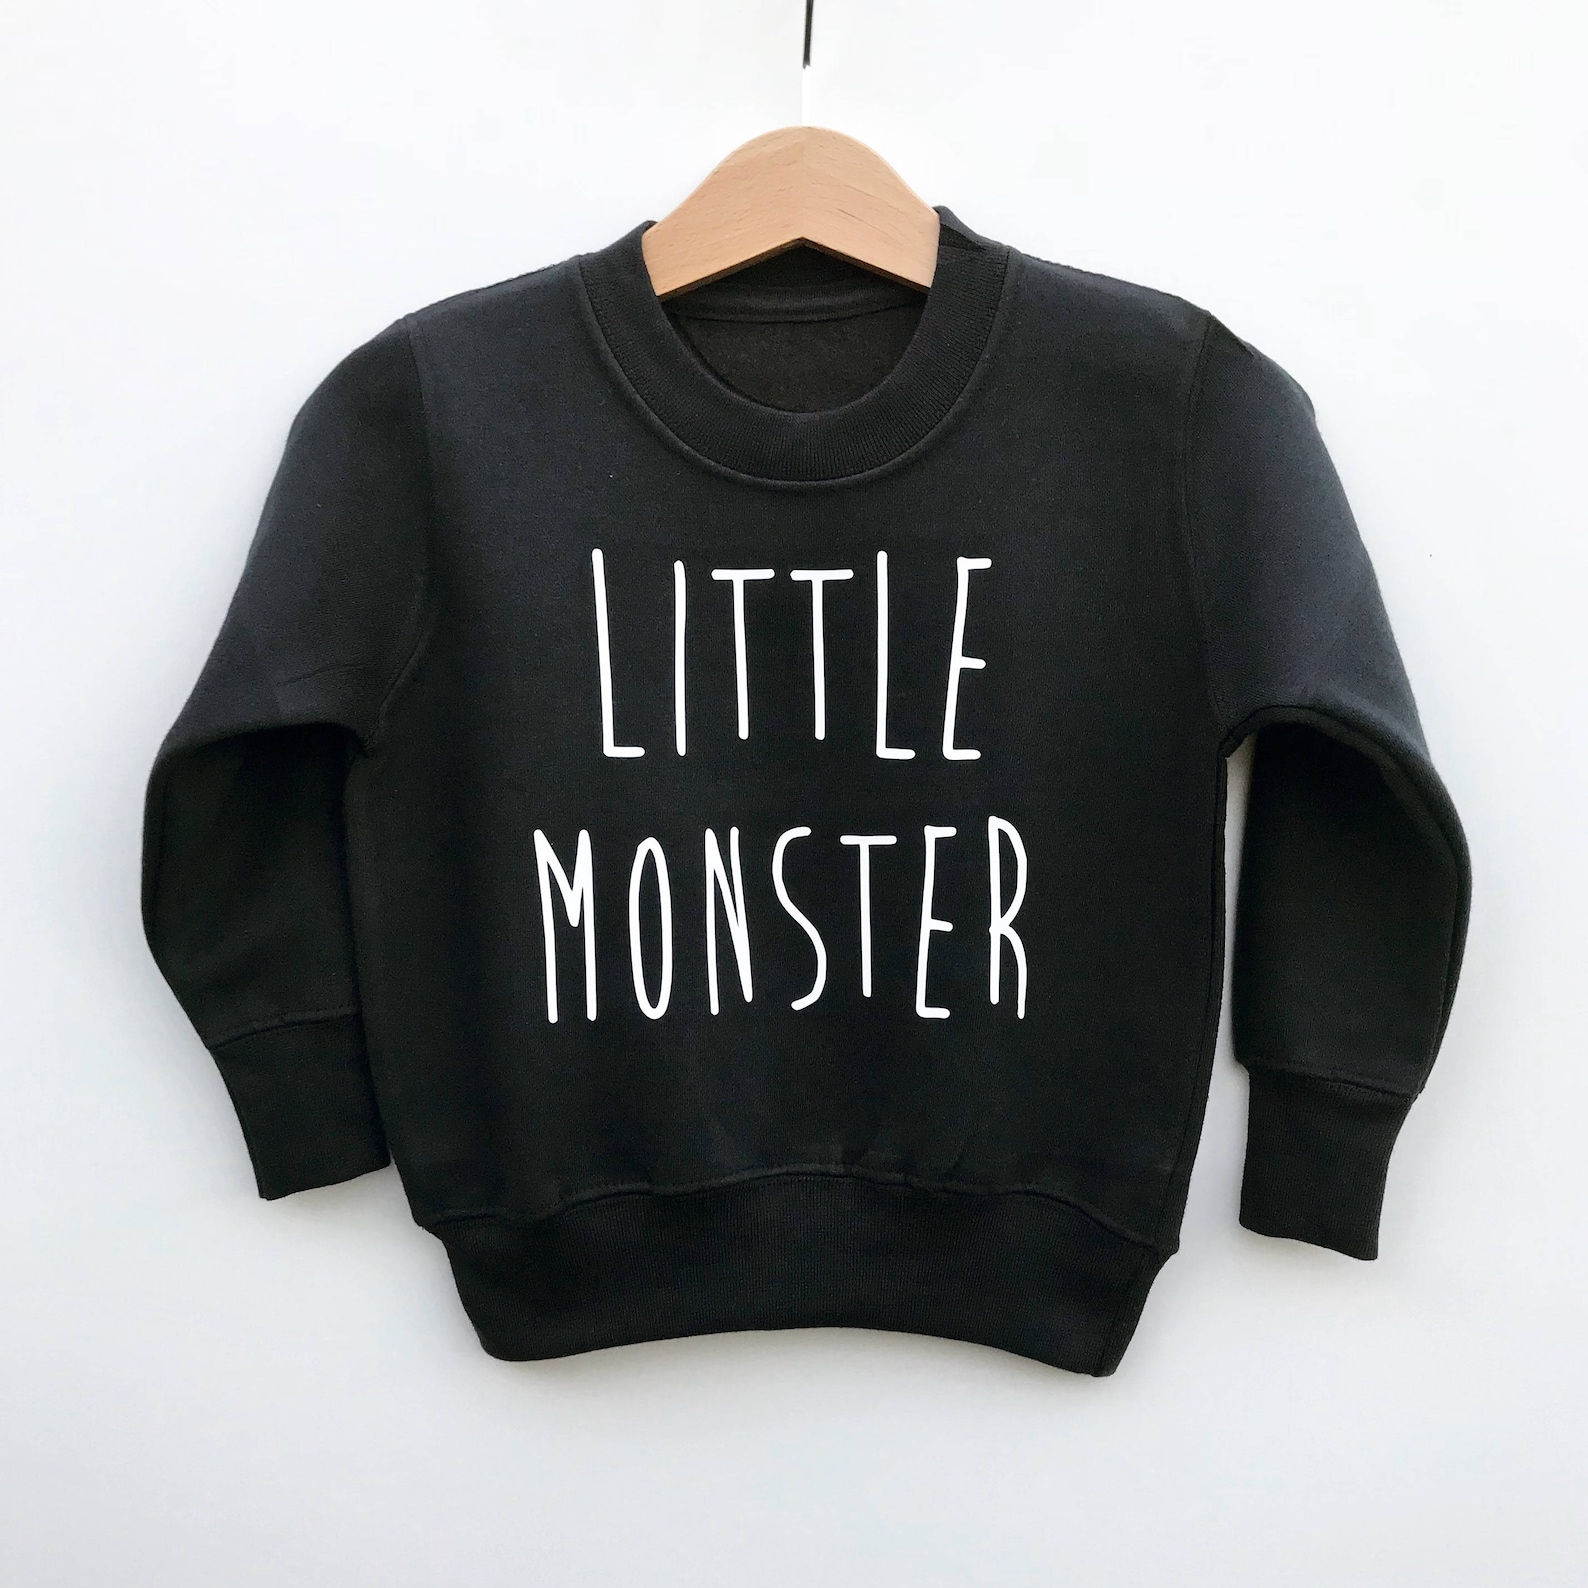 Like that baby monster текст